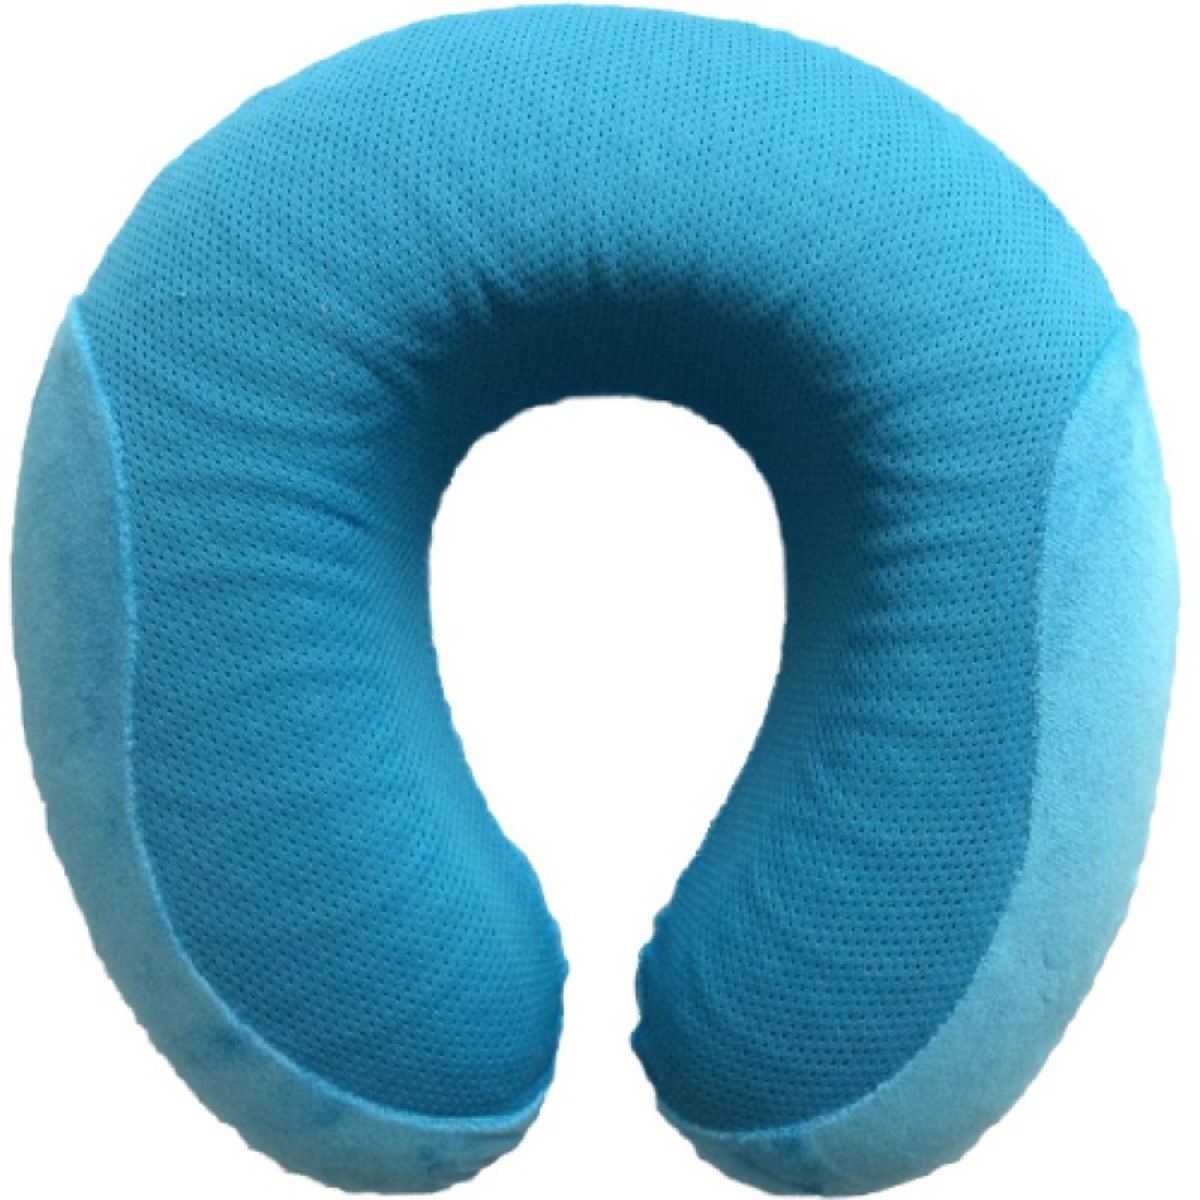 Lux Voyage Cooling Gel-infused Memory Foam Travel Neck Pillow 